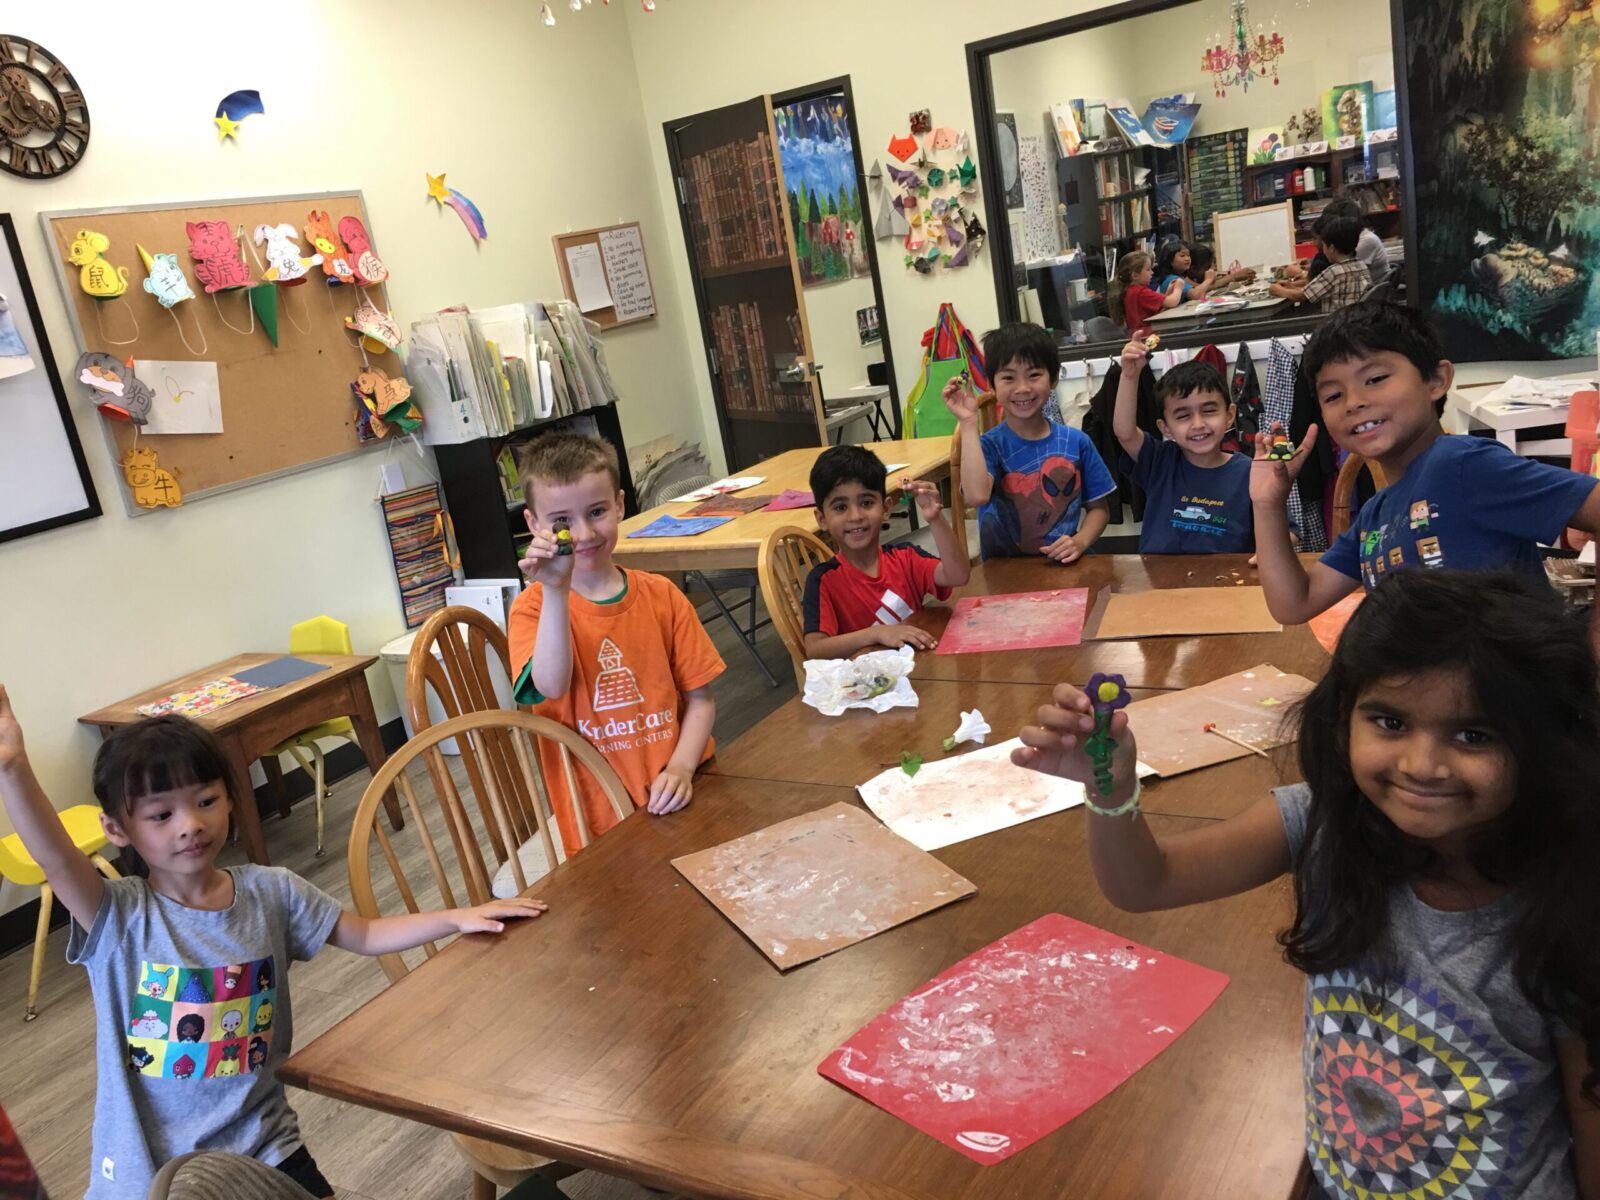 Kids happily showing their clay crafts